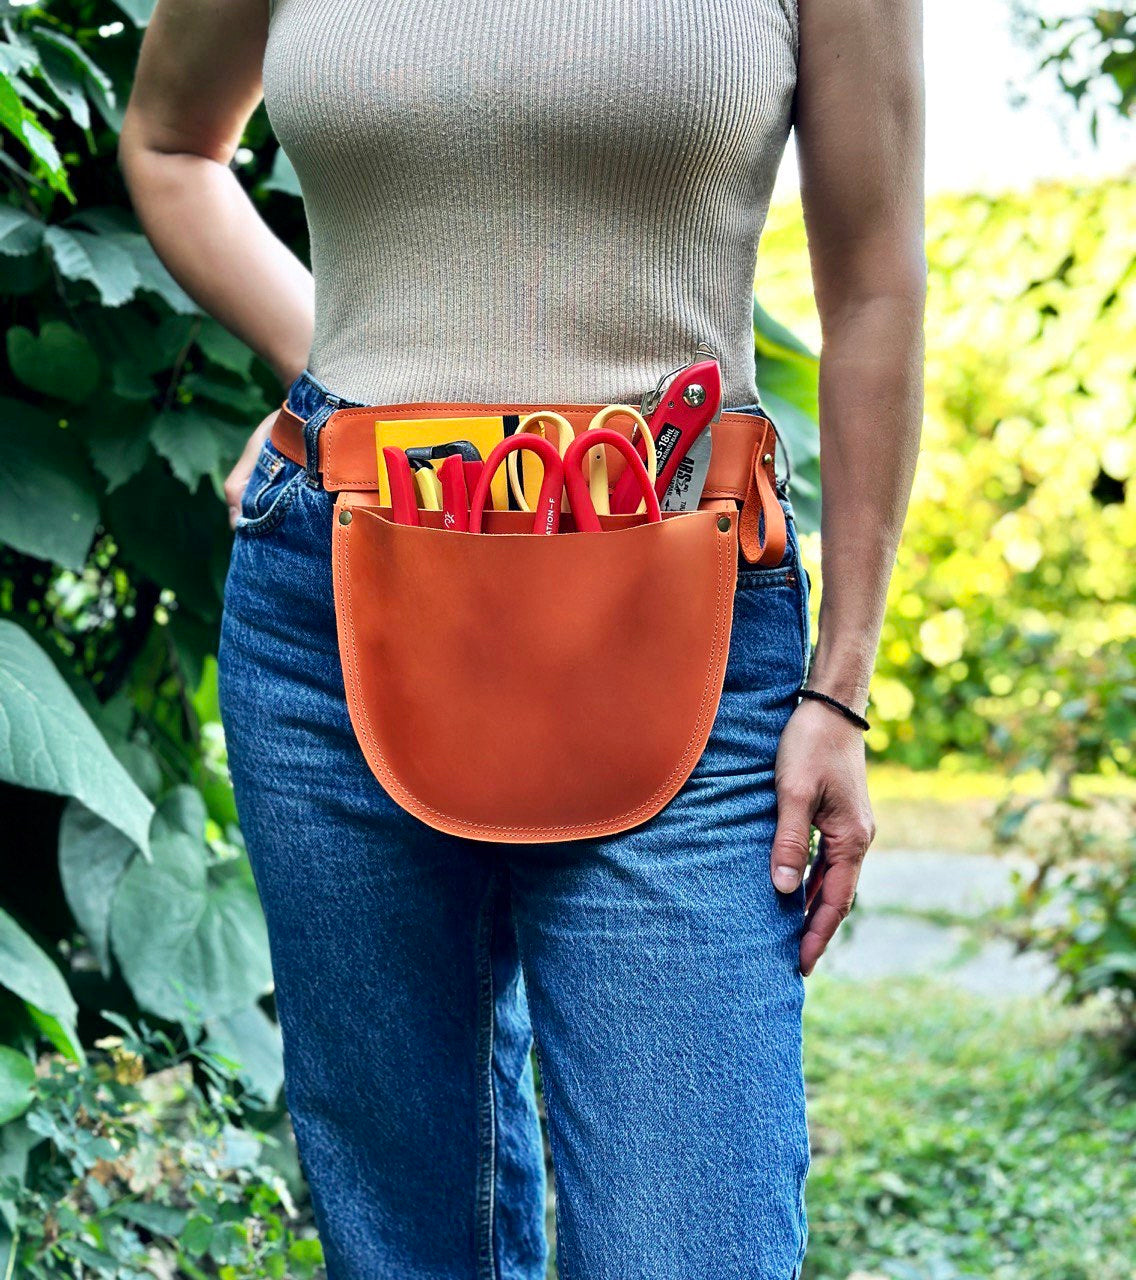  Personalized leather garden tool belt, distressed